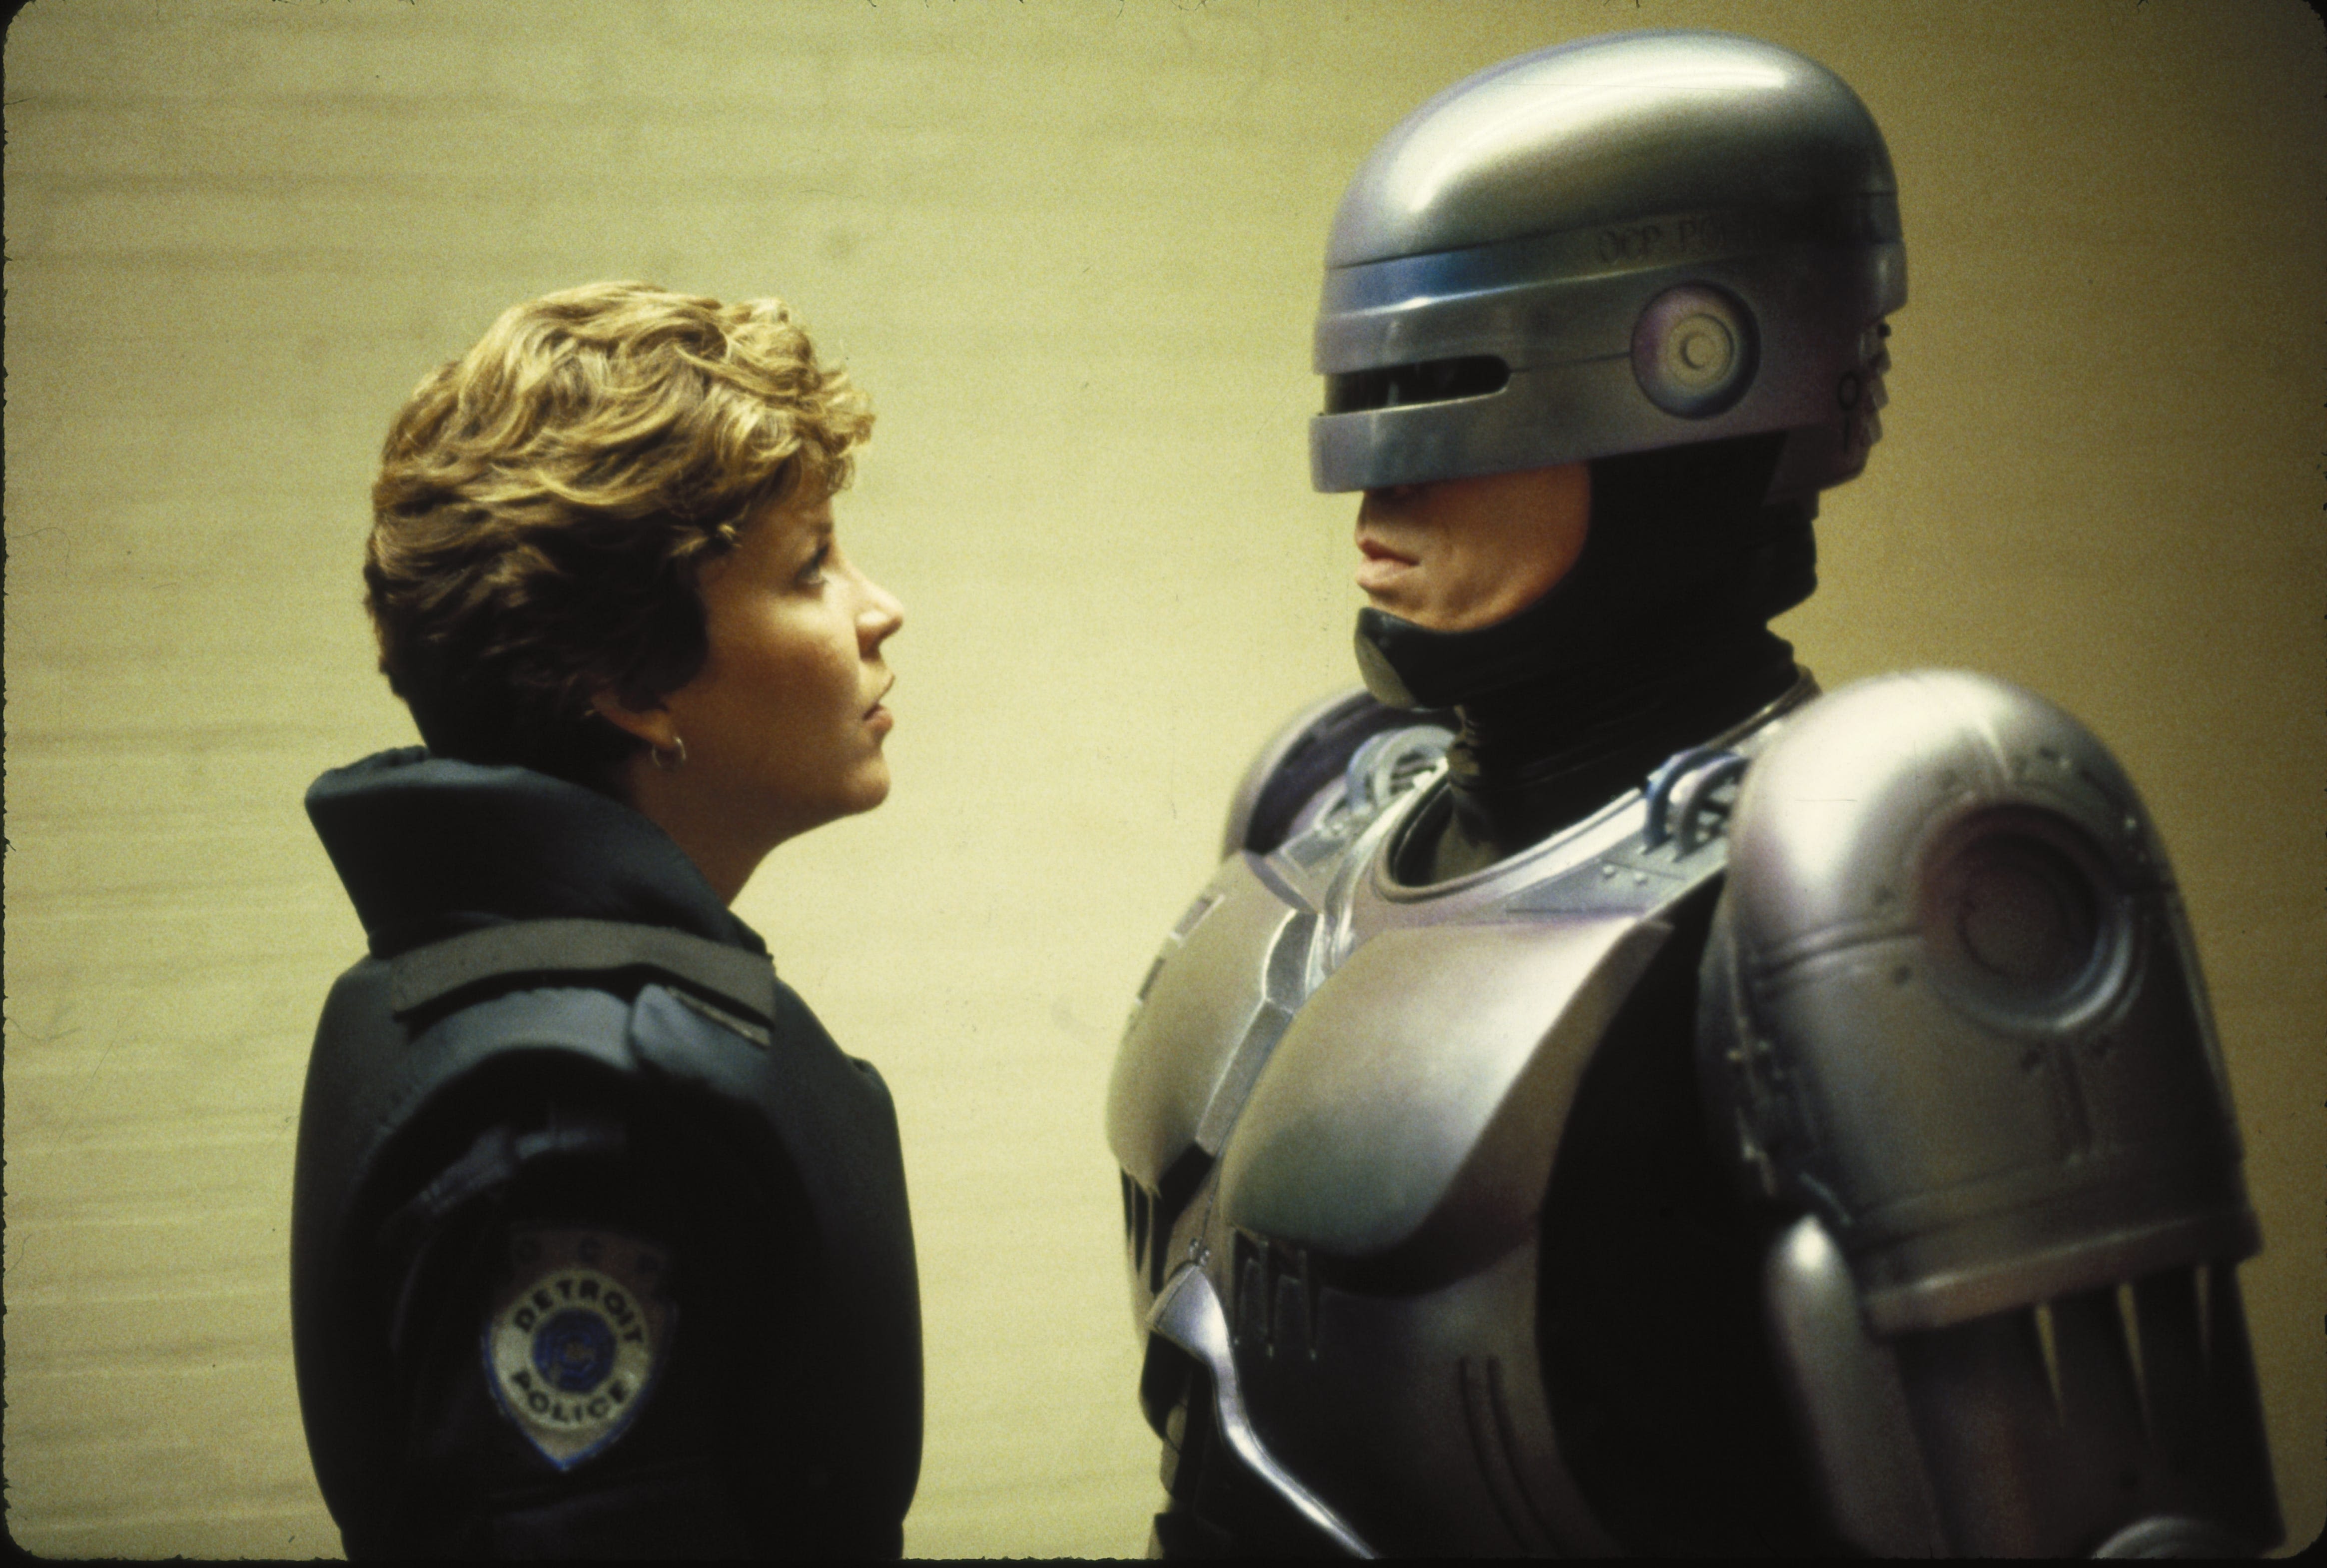 'RoboCop' critics missed the point of the movie | Letters